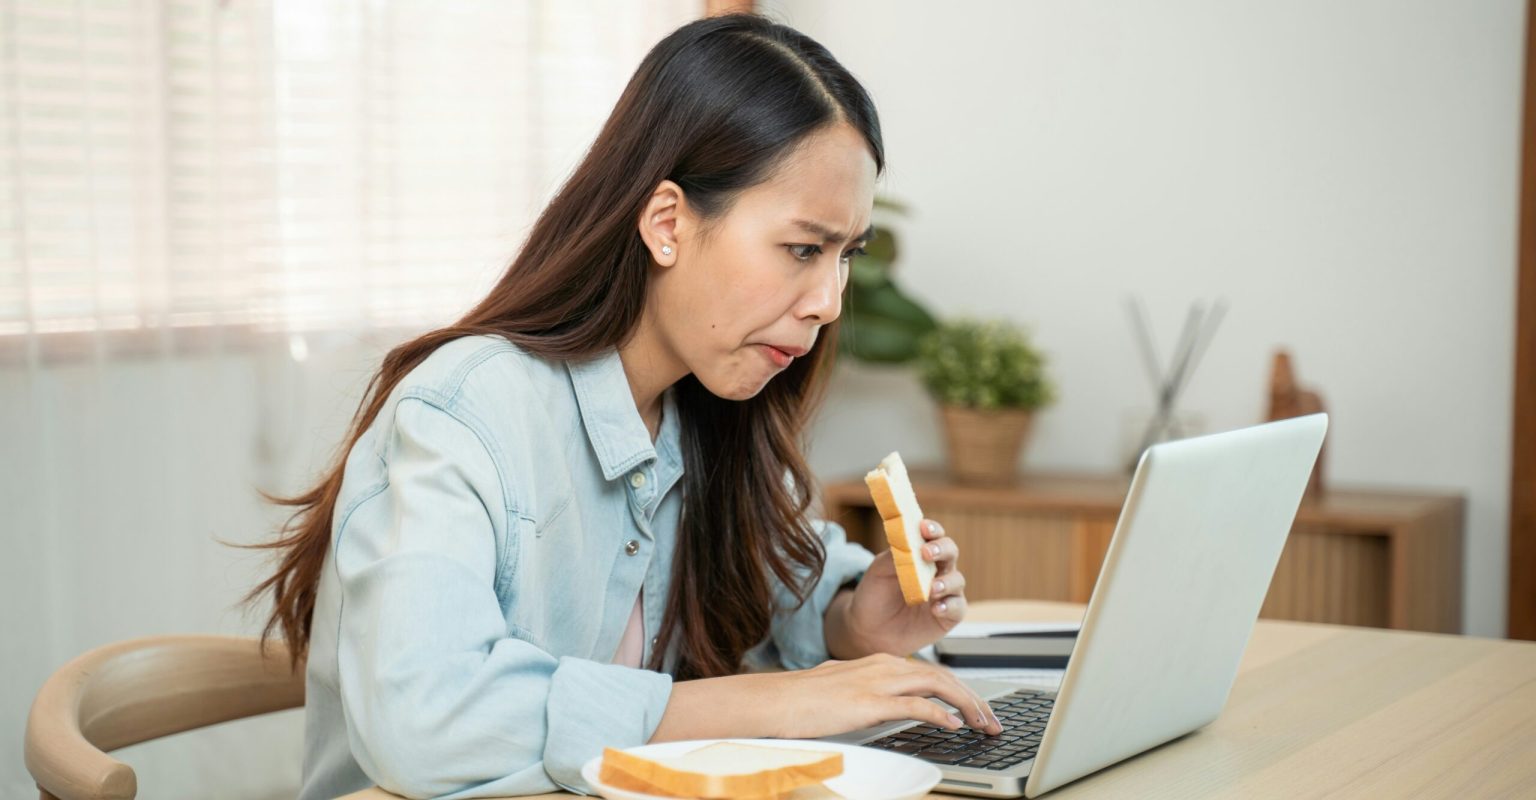 A woman is working at a laptop while eating breakfast. She looks a bit harassed.